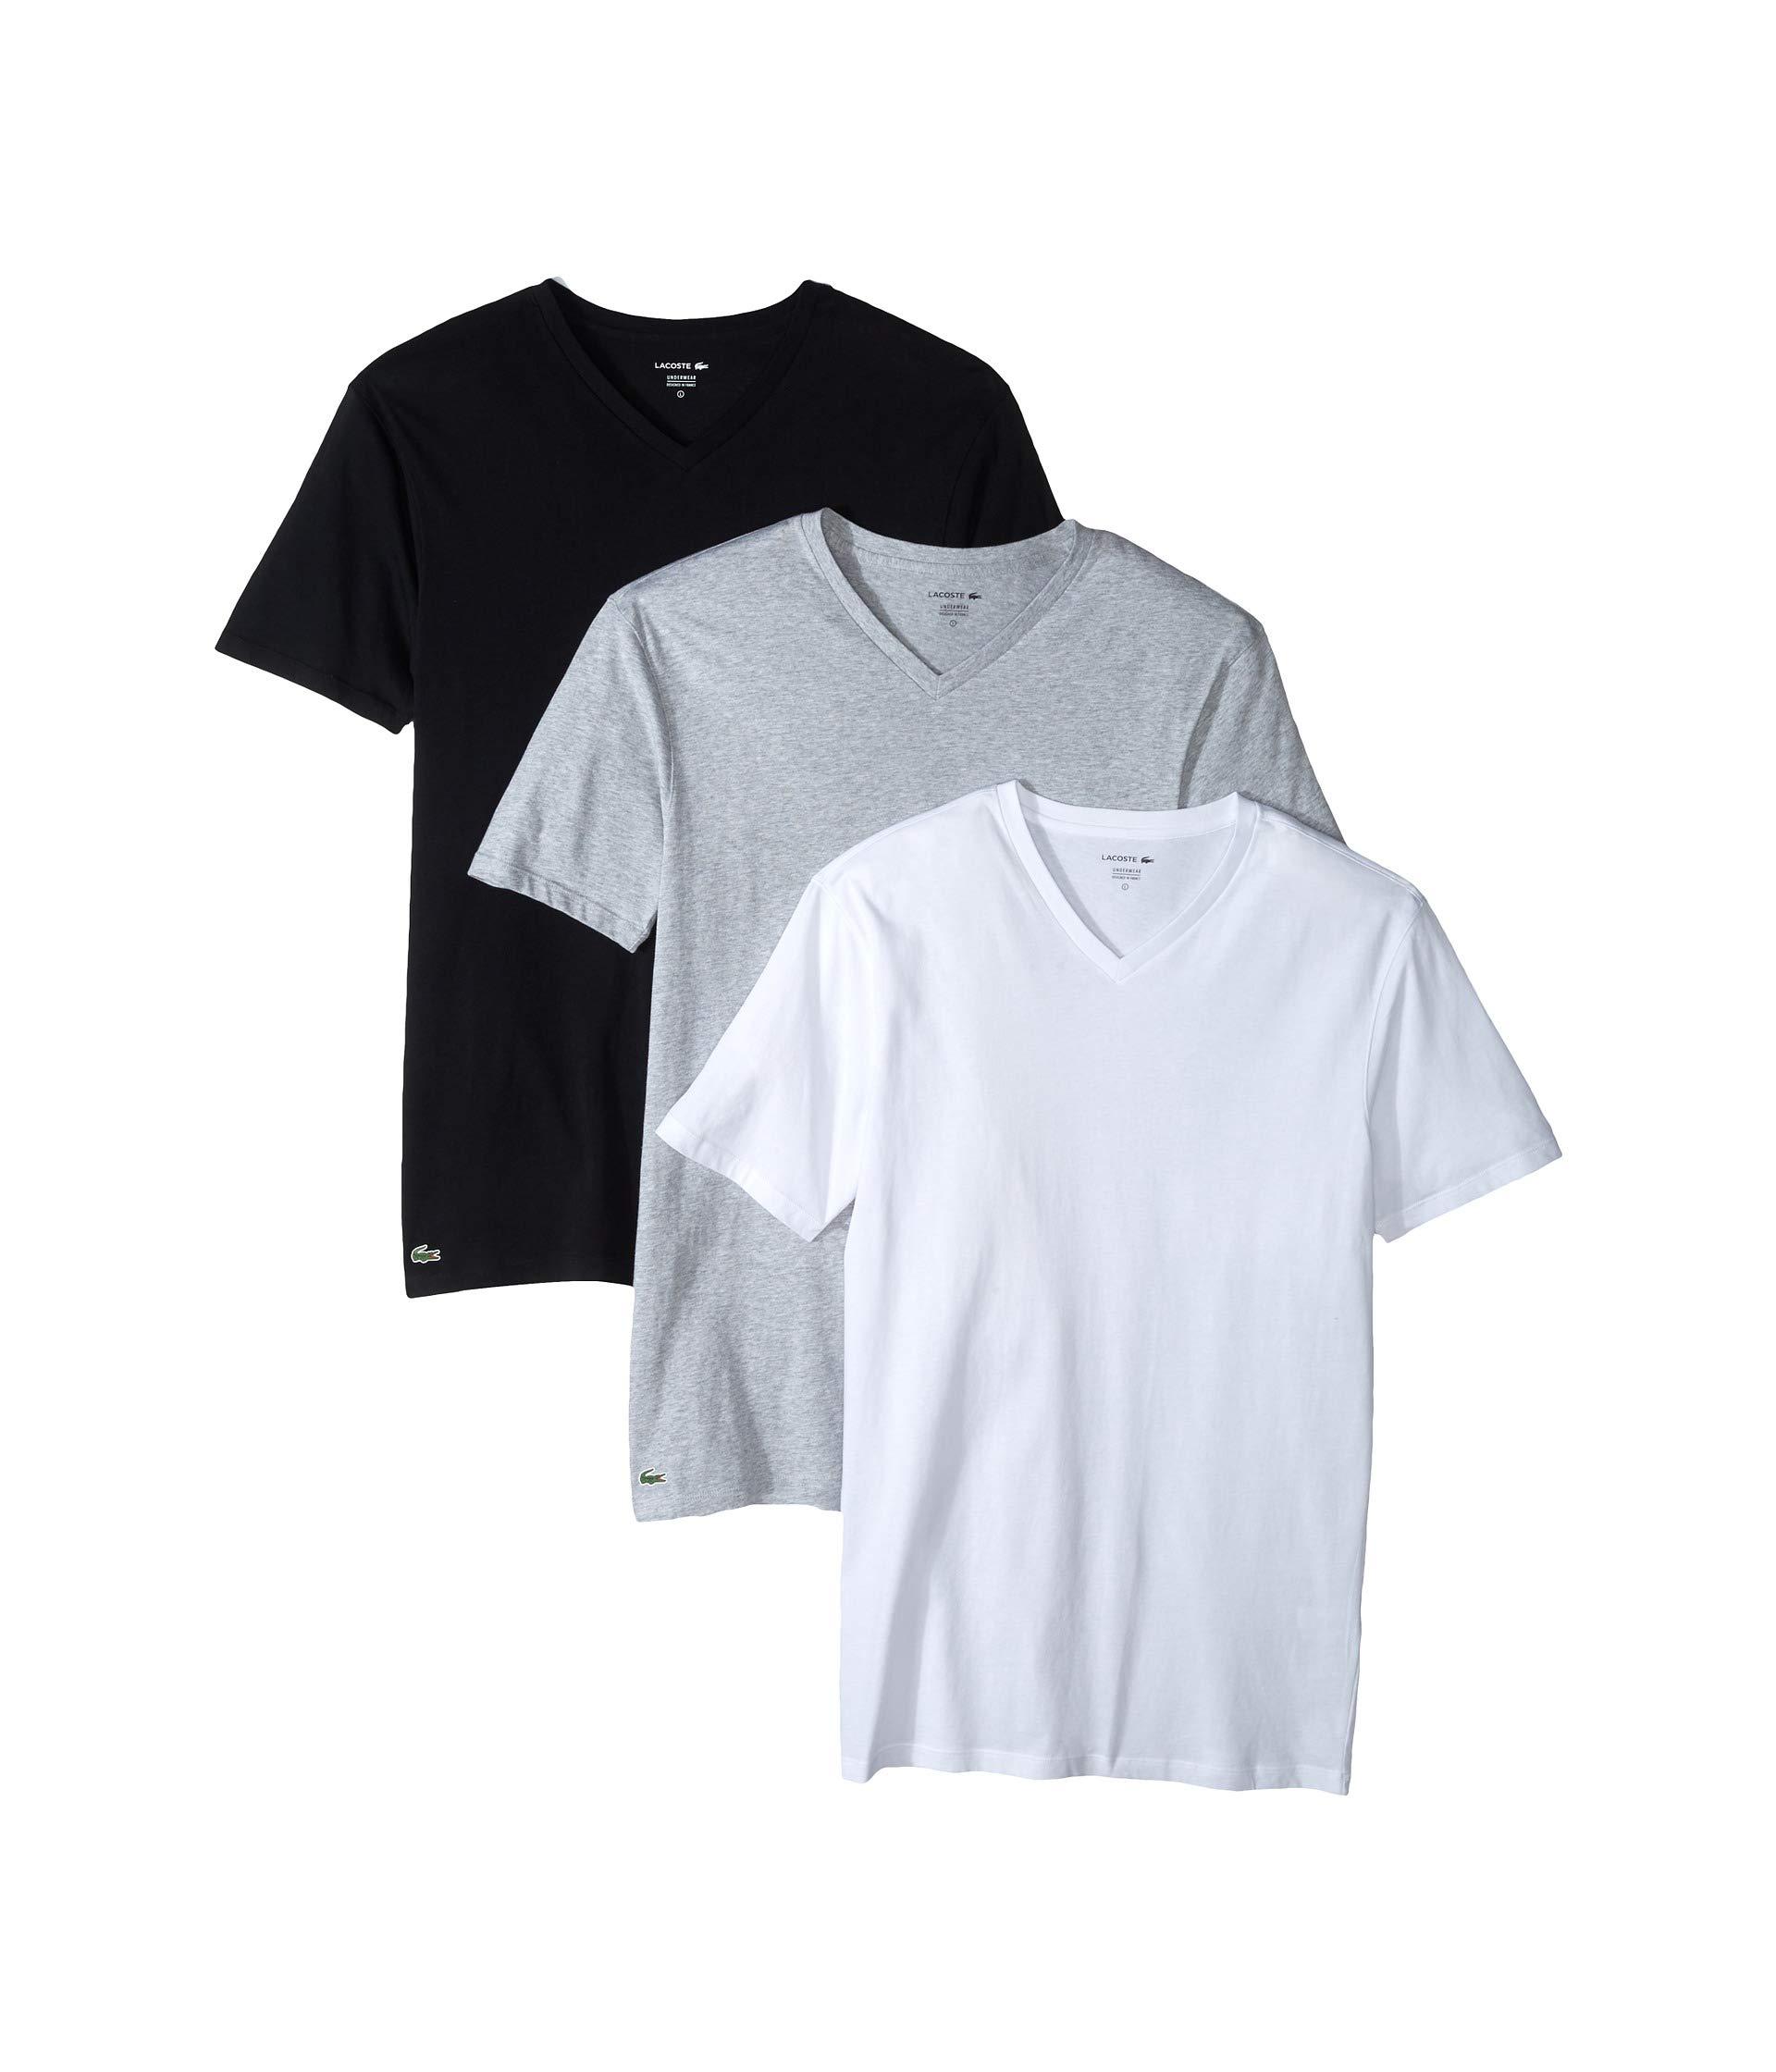 Lacoste Essentials 3-pack Classic Fit V-neck Tee (black/grey/white) Men ...